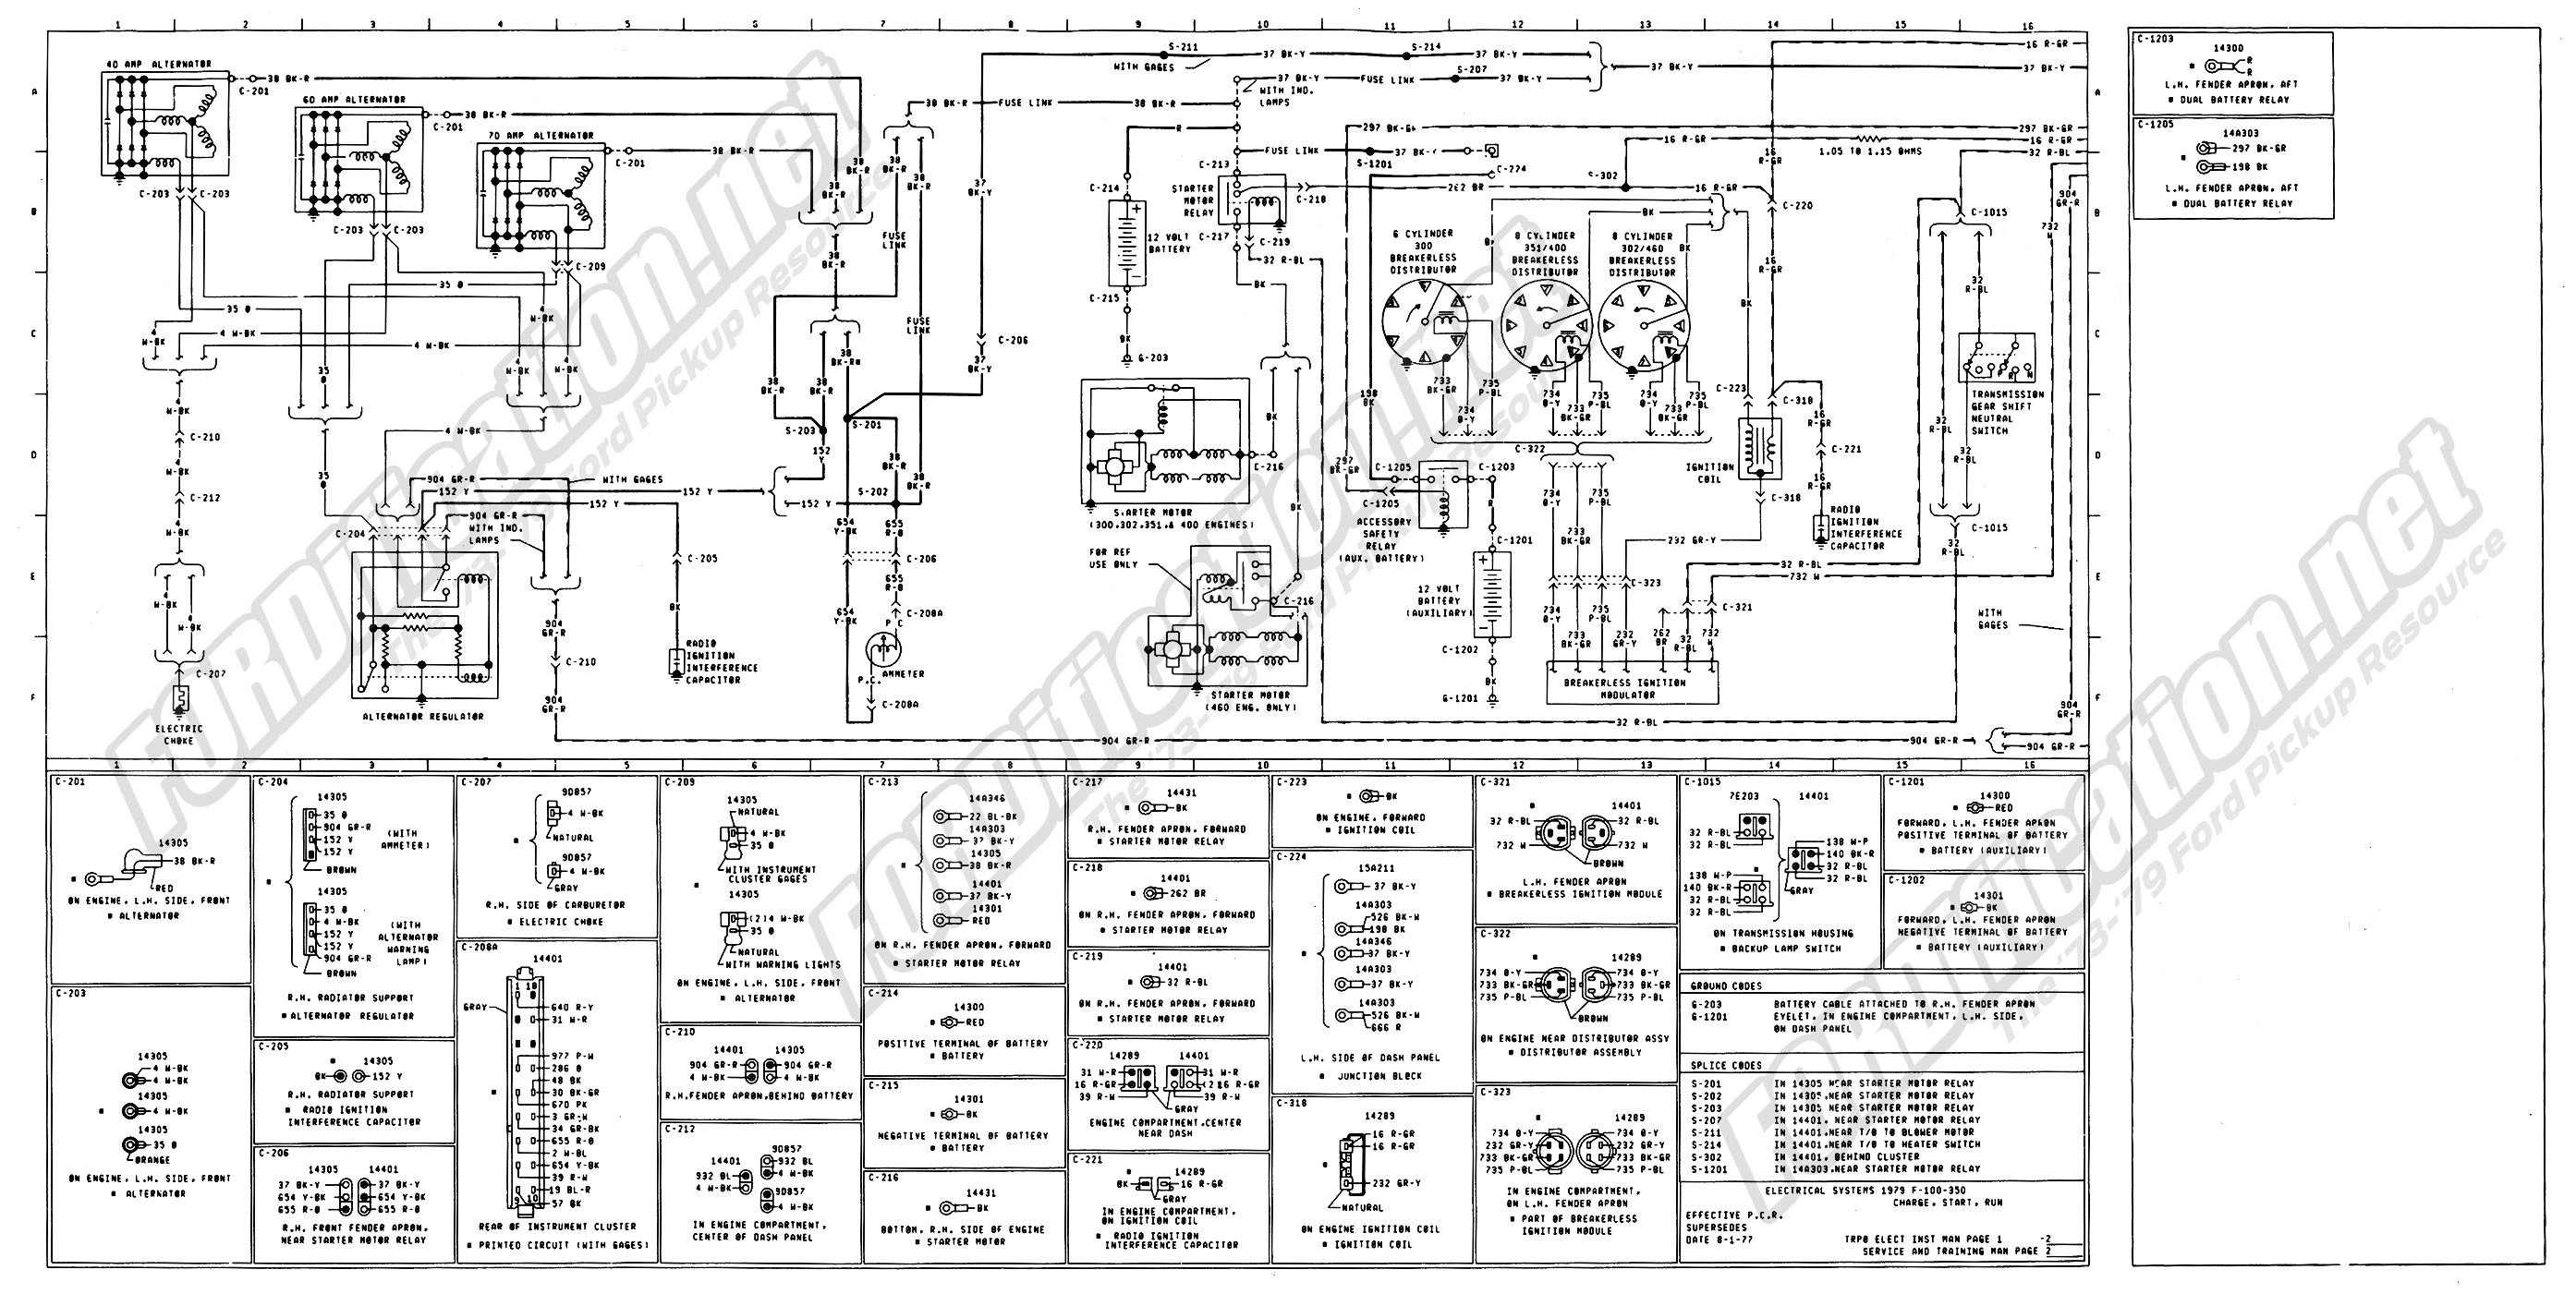 1979 ford Truck Wiring Diagram 1973 1979 ford Truck Wiring Diagrams & Schematics fordification Of 1979 ford Truck Wiring Diagram